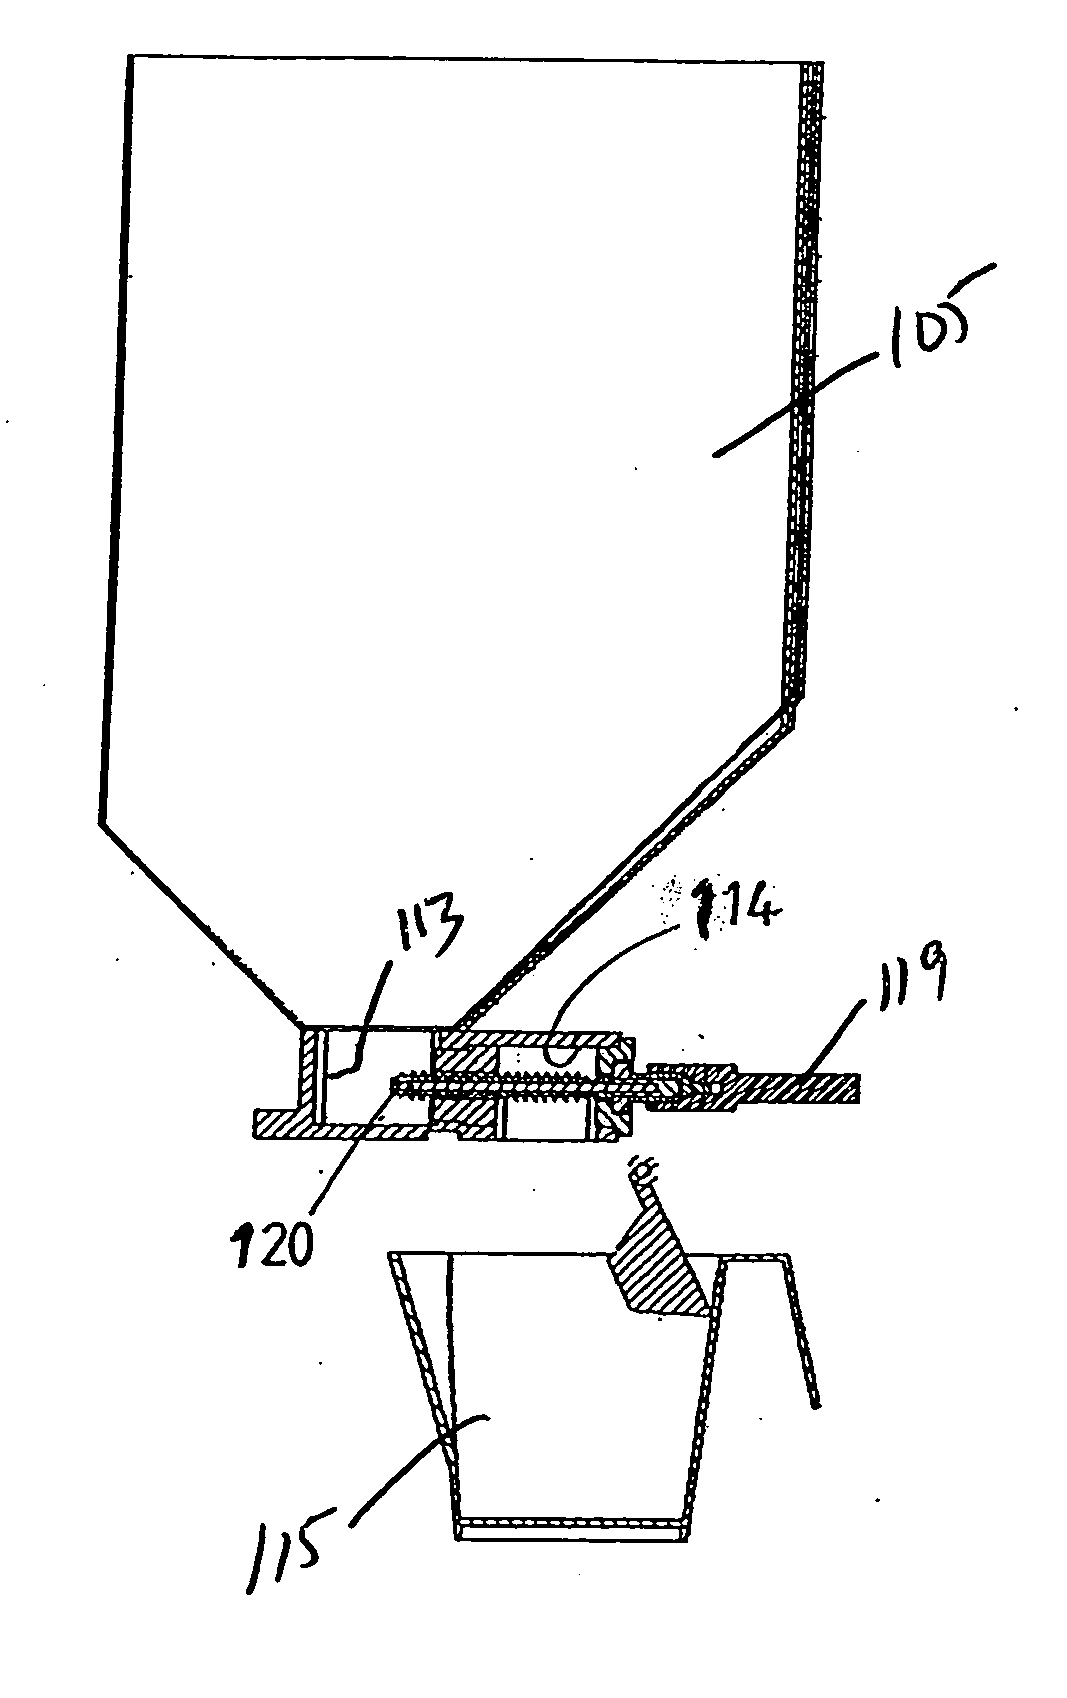 Apparatuses for dispensing materials volumetrically and gravimetrically based on a stored formula and methods of dispensing formulas using the same